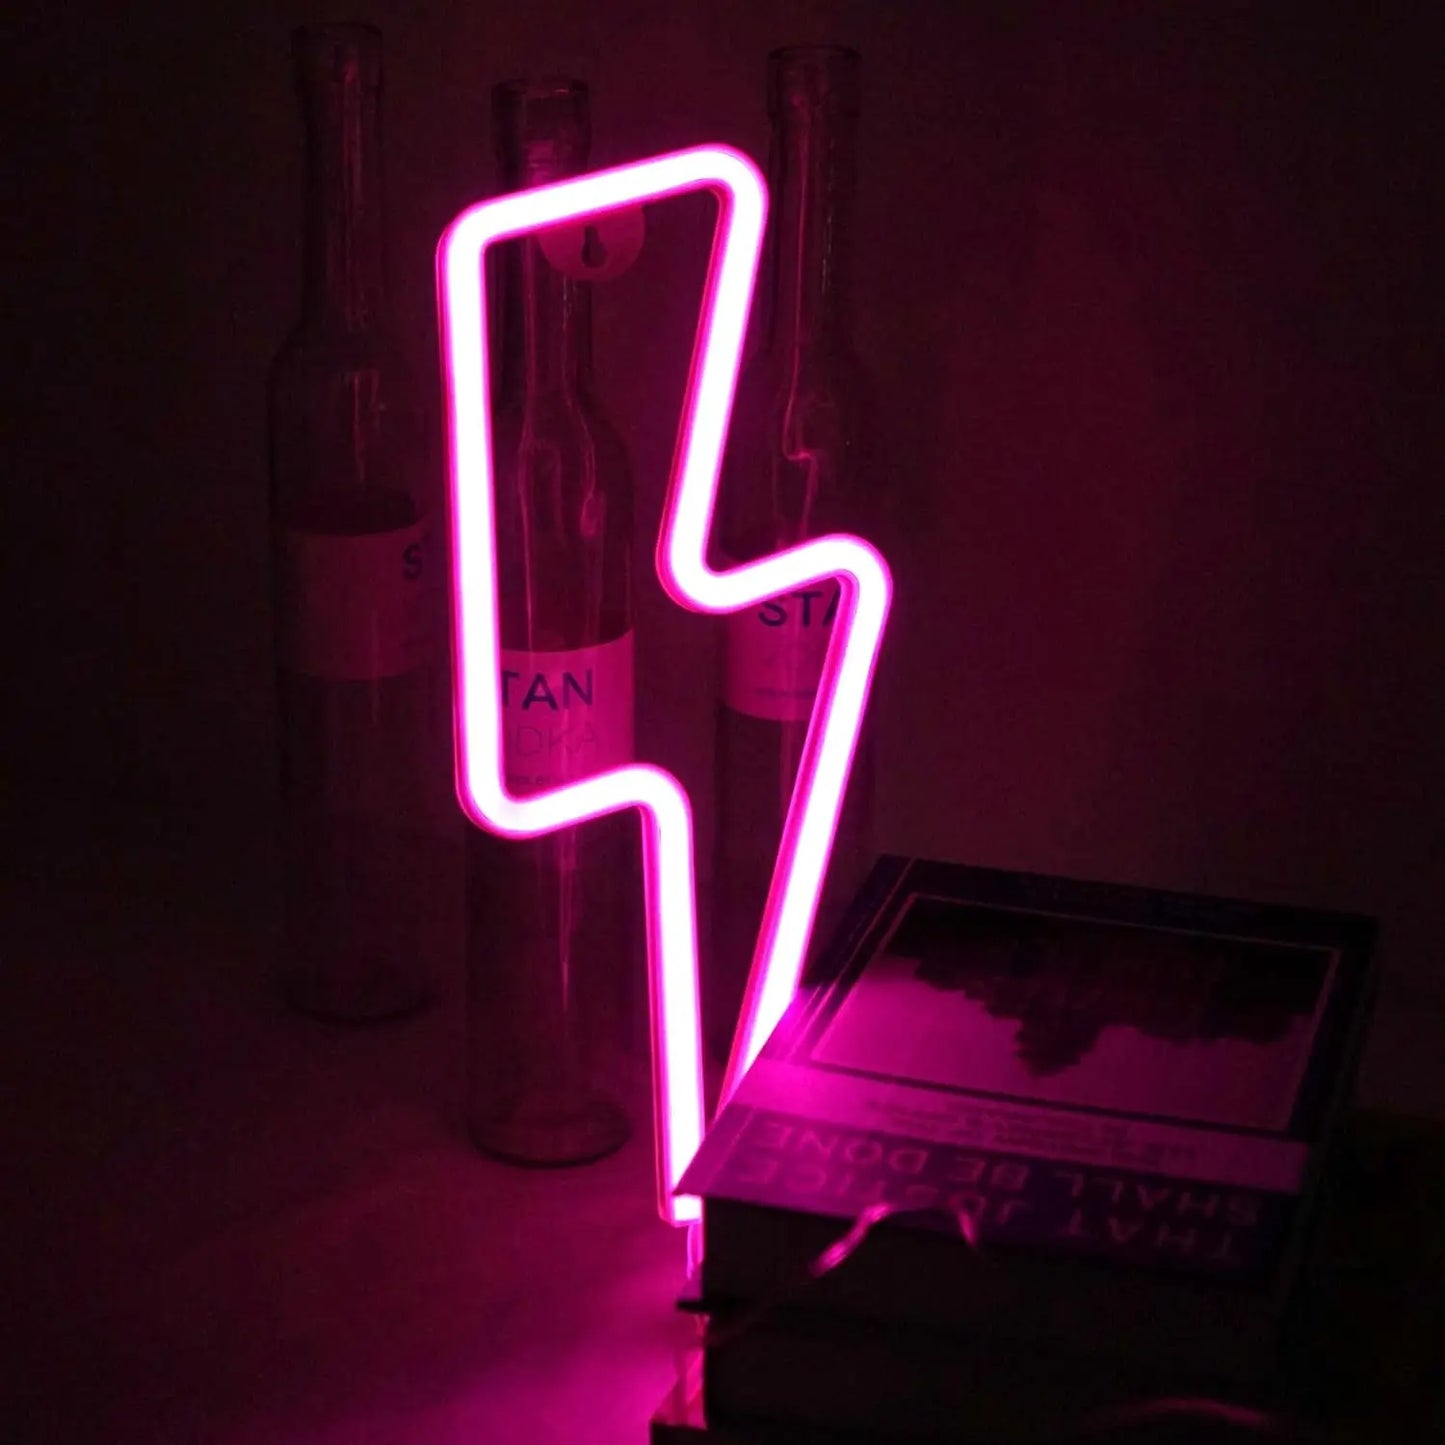 Lightning Neon Sign, Battery or USB Powered LED Night Light for Kids Room, Pink Bedroom Wall Decor for Festival, Party Decorations